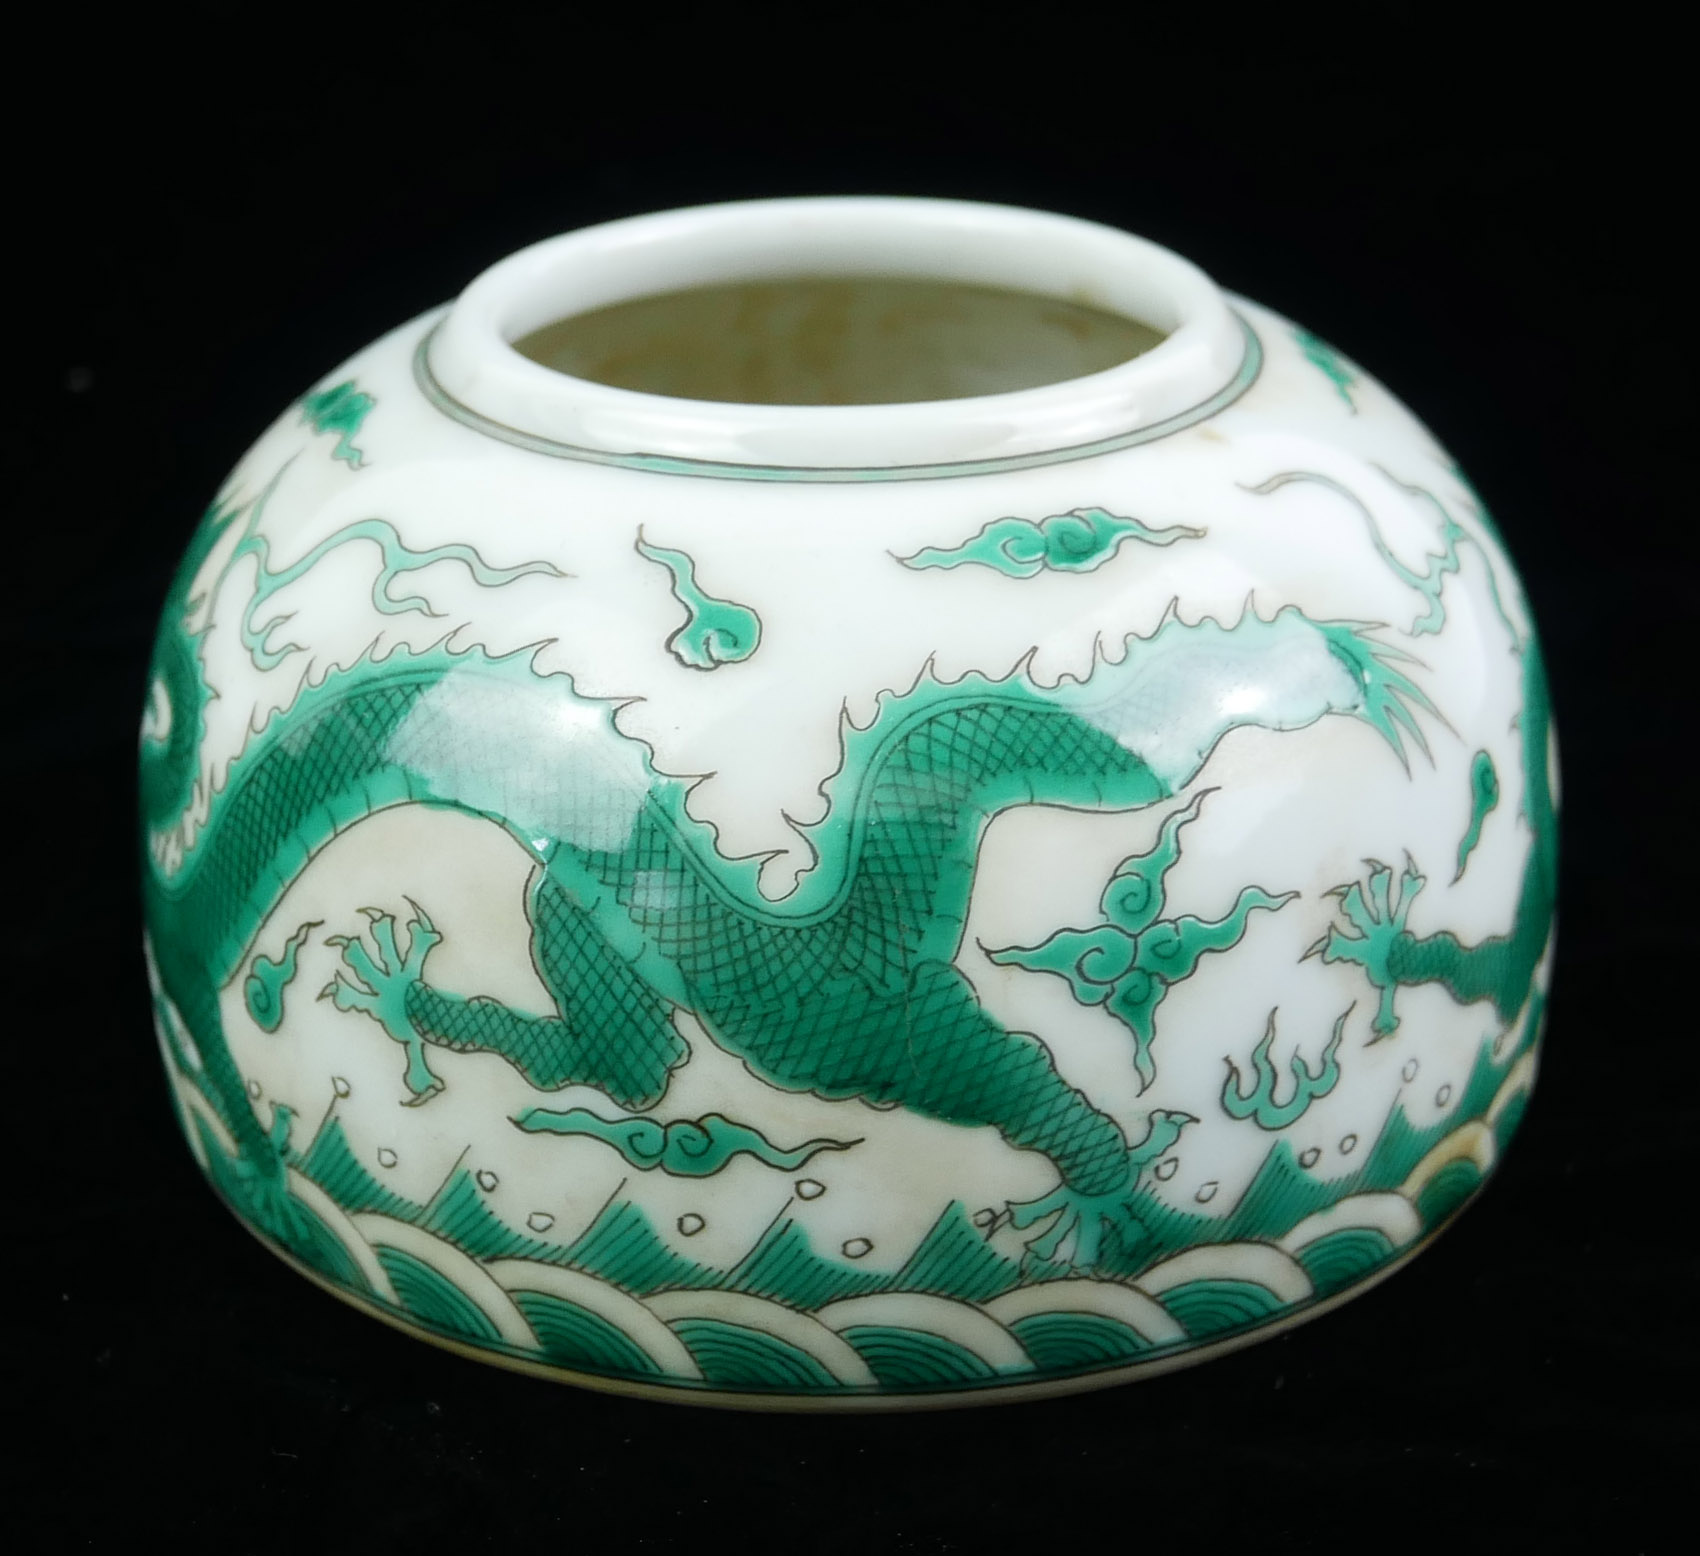 A CHINESE PORCELAIN SPHERICAL 'DRAGON' INKWELL With green opposing dragons chasing a flaming - Image 2 of 4